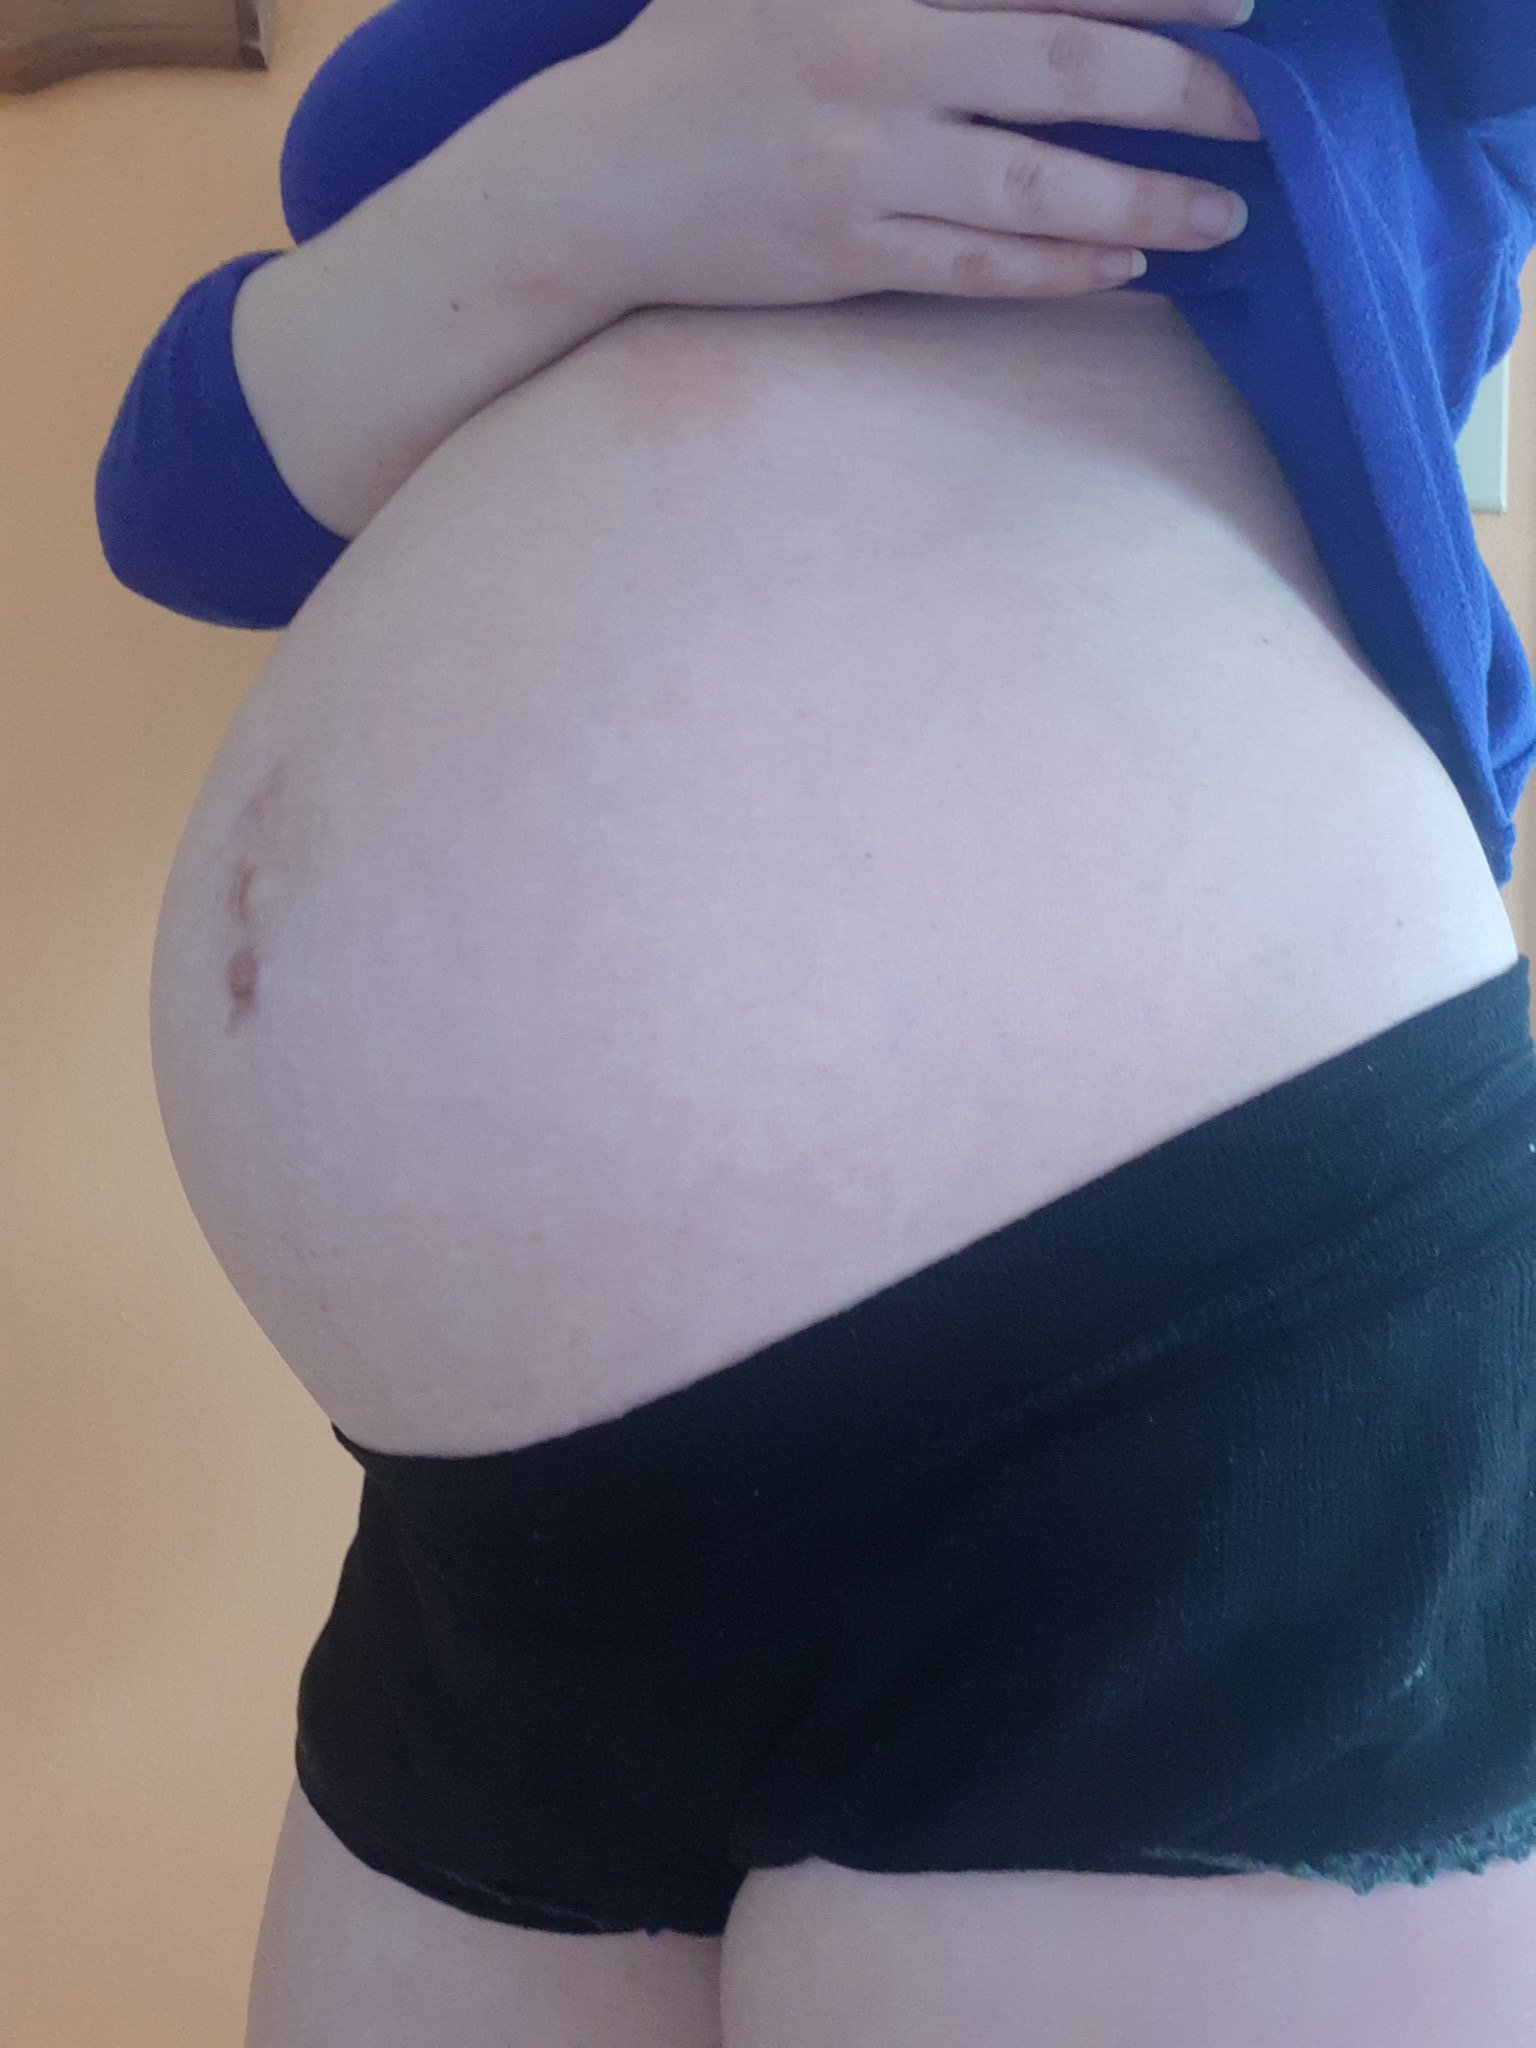 1 pic. 36 weeks/9 months (finally) pregnant! Soon my son will be here and than there will be NO MORE